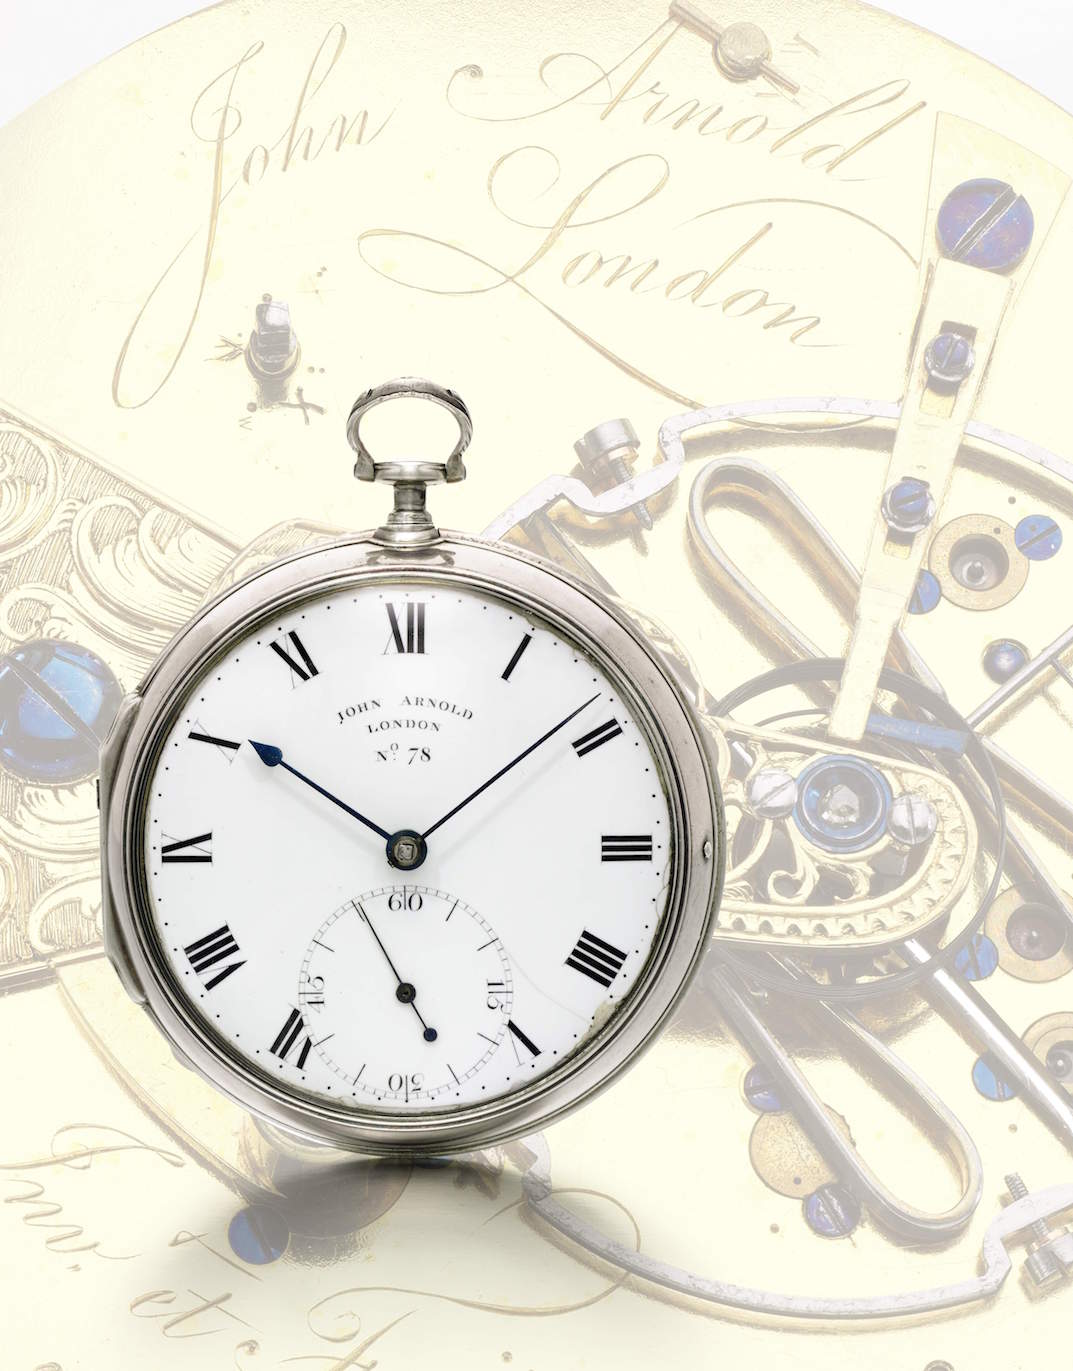 Historic British Watches by John Arnold and Others Sold by Sotheby’s